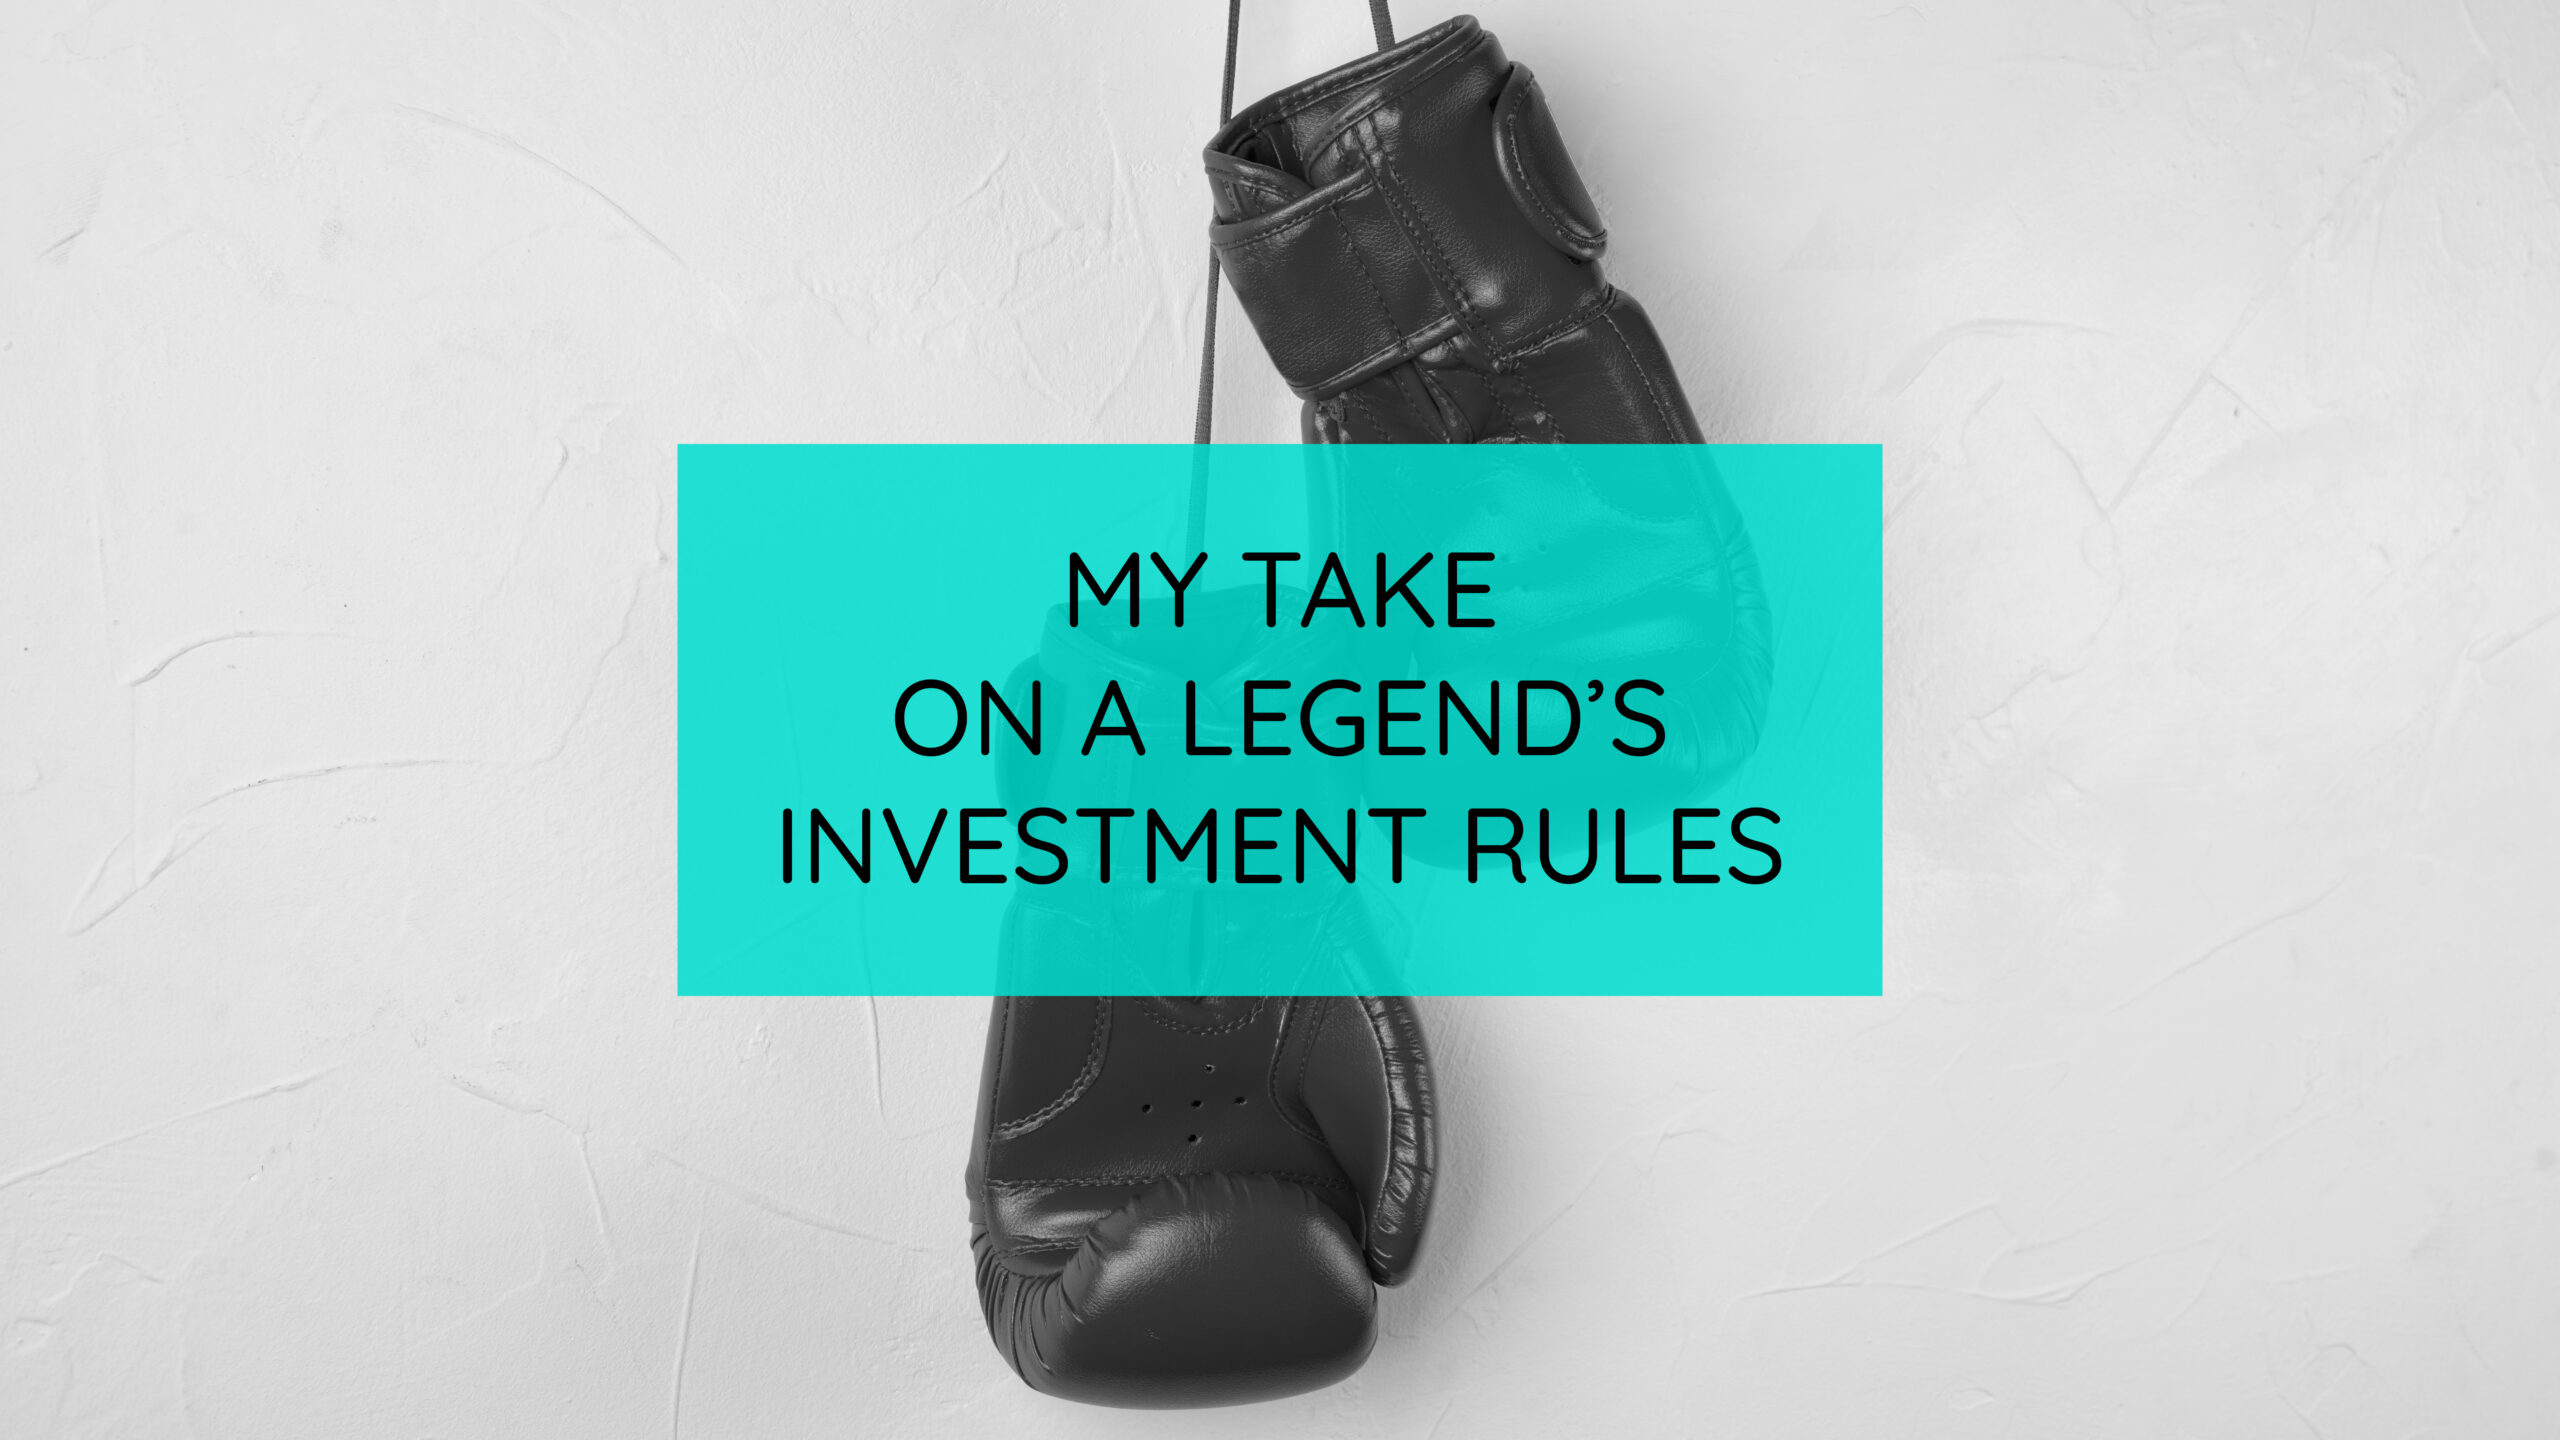 My Take on a Legend’sInvestment Rules